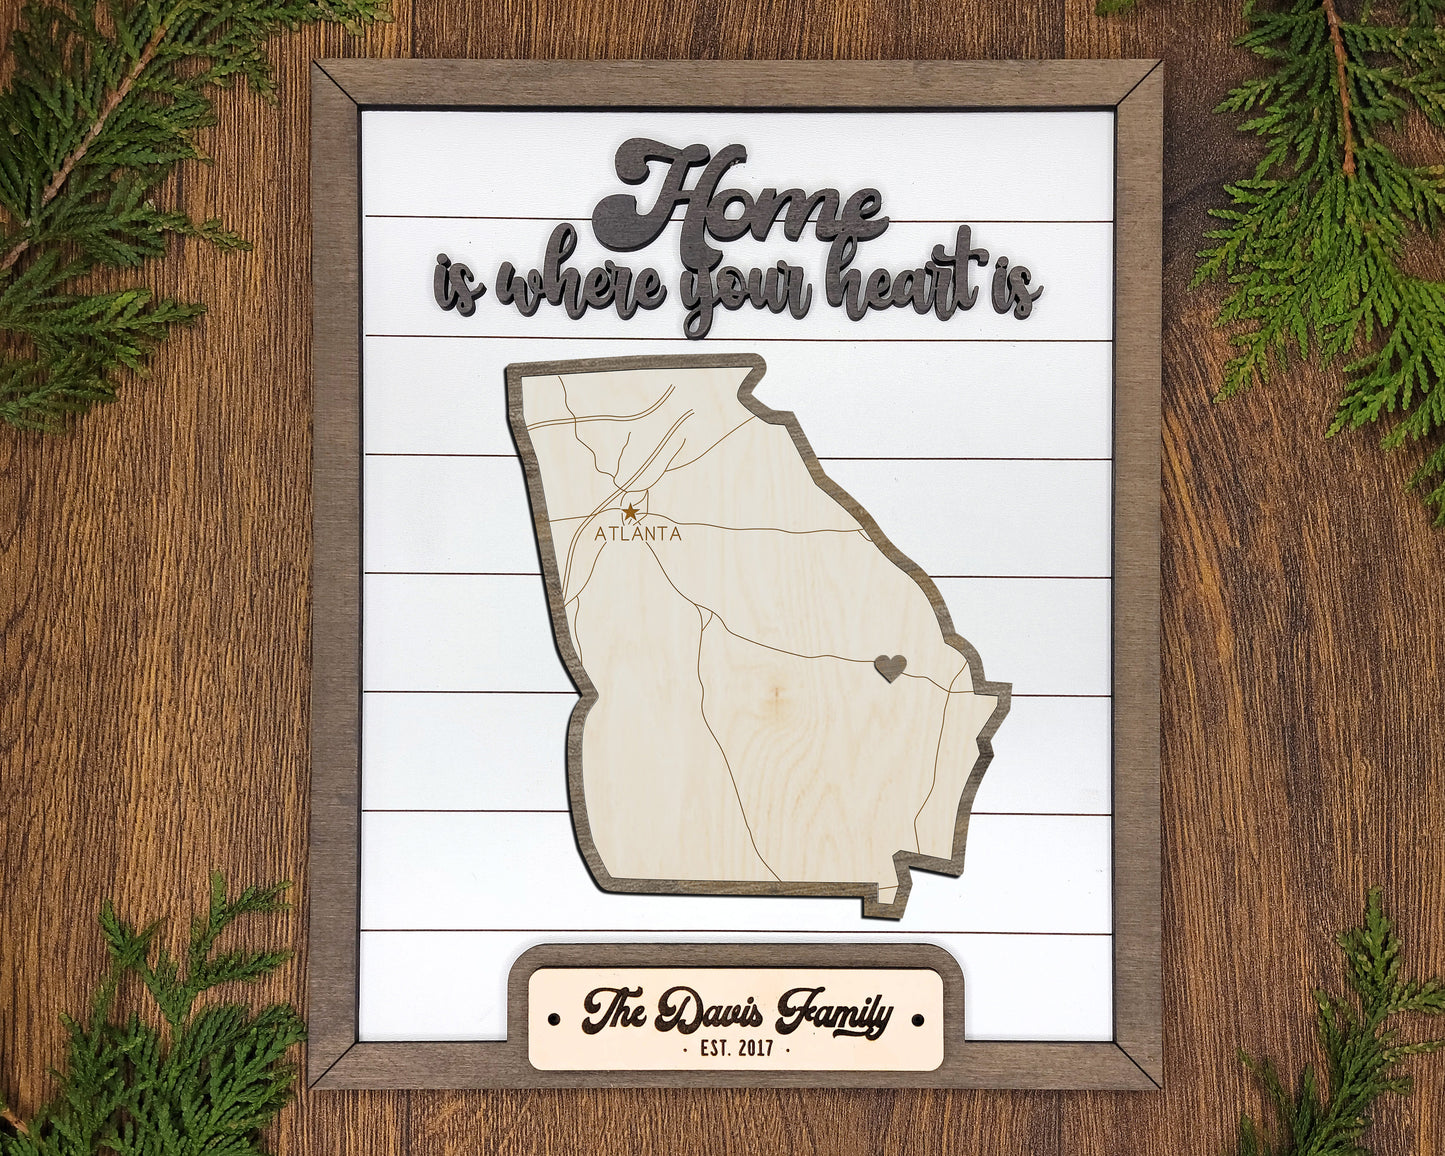 The Georgia State Frame - 13 text options, 12 backgrounds, 25 icons Included - Make over 7,500 designs - Glowforge & Lightburn Tested